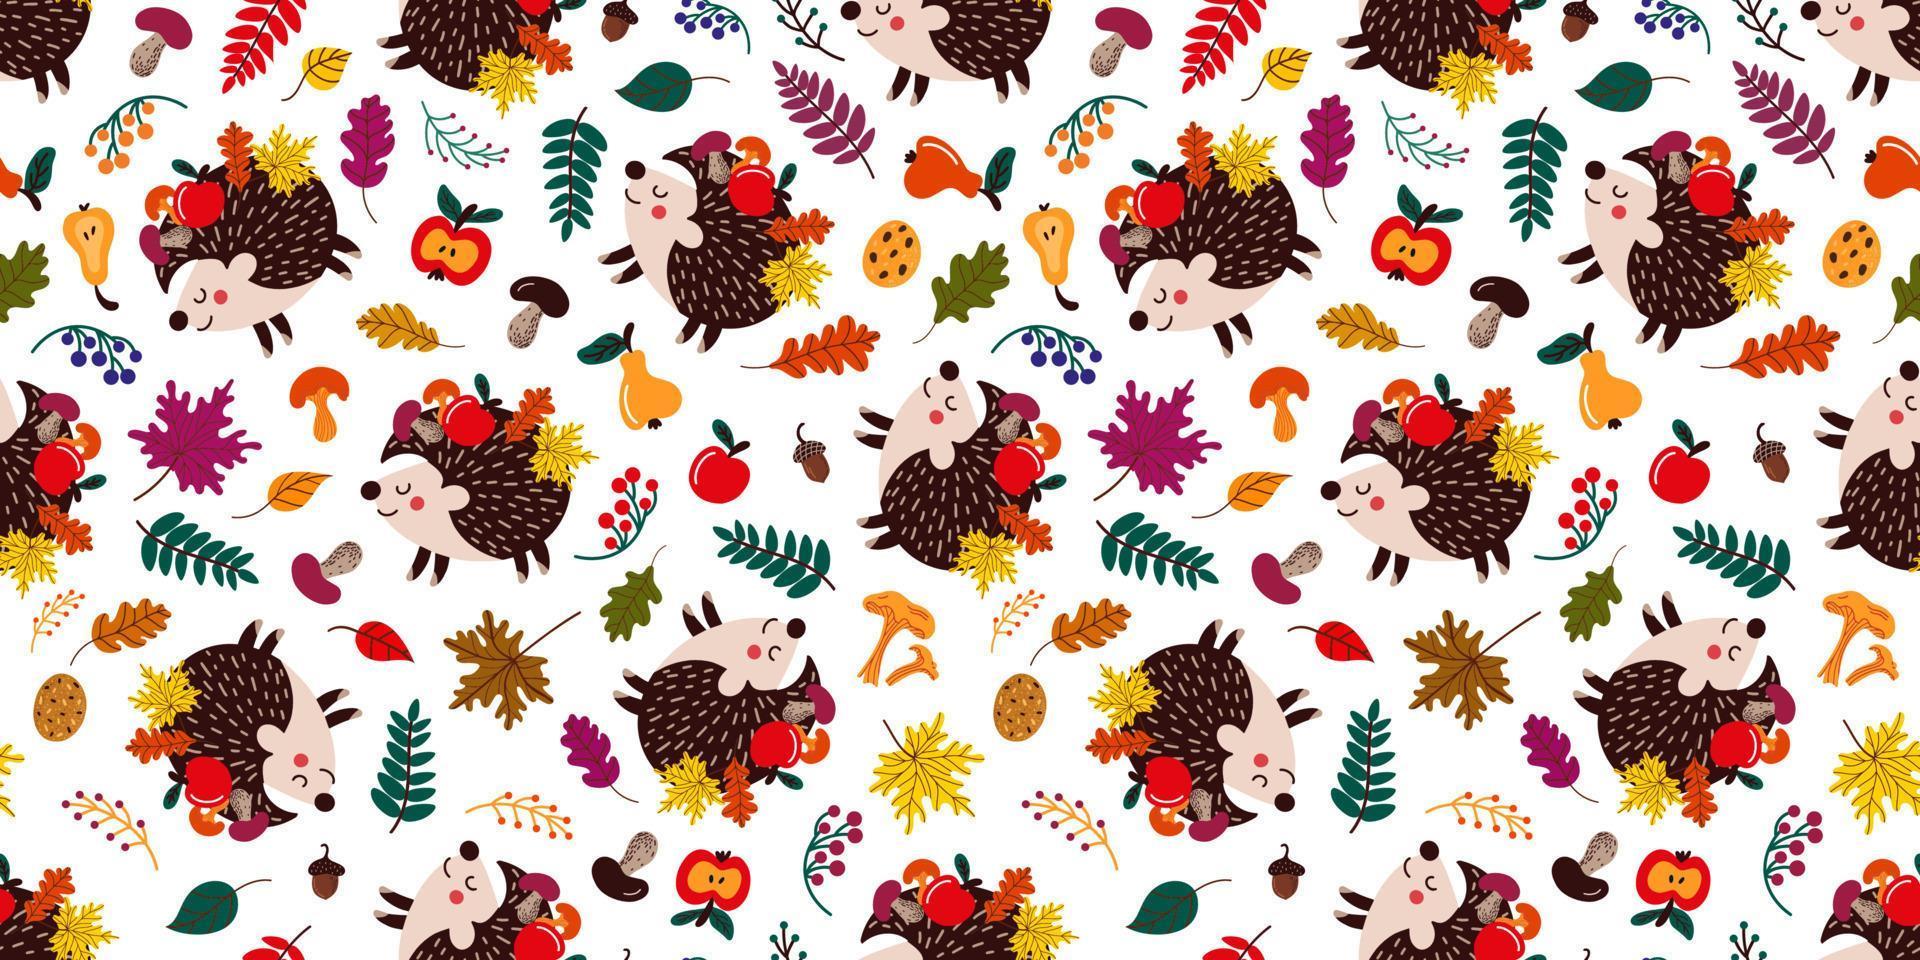 Background of cute cartoon hedgehogs among autumn leaves and fruits with mushrooms vector